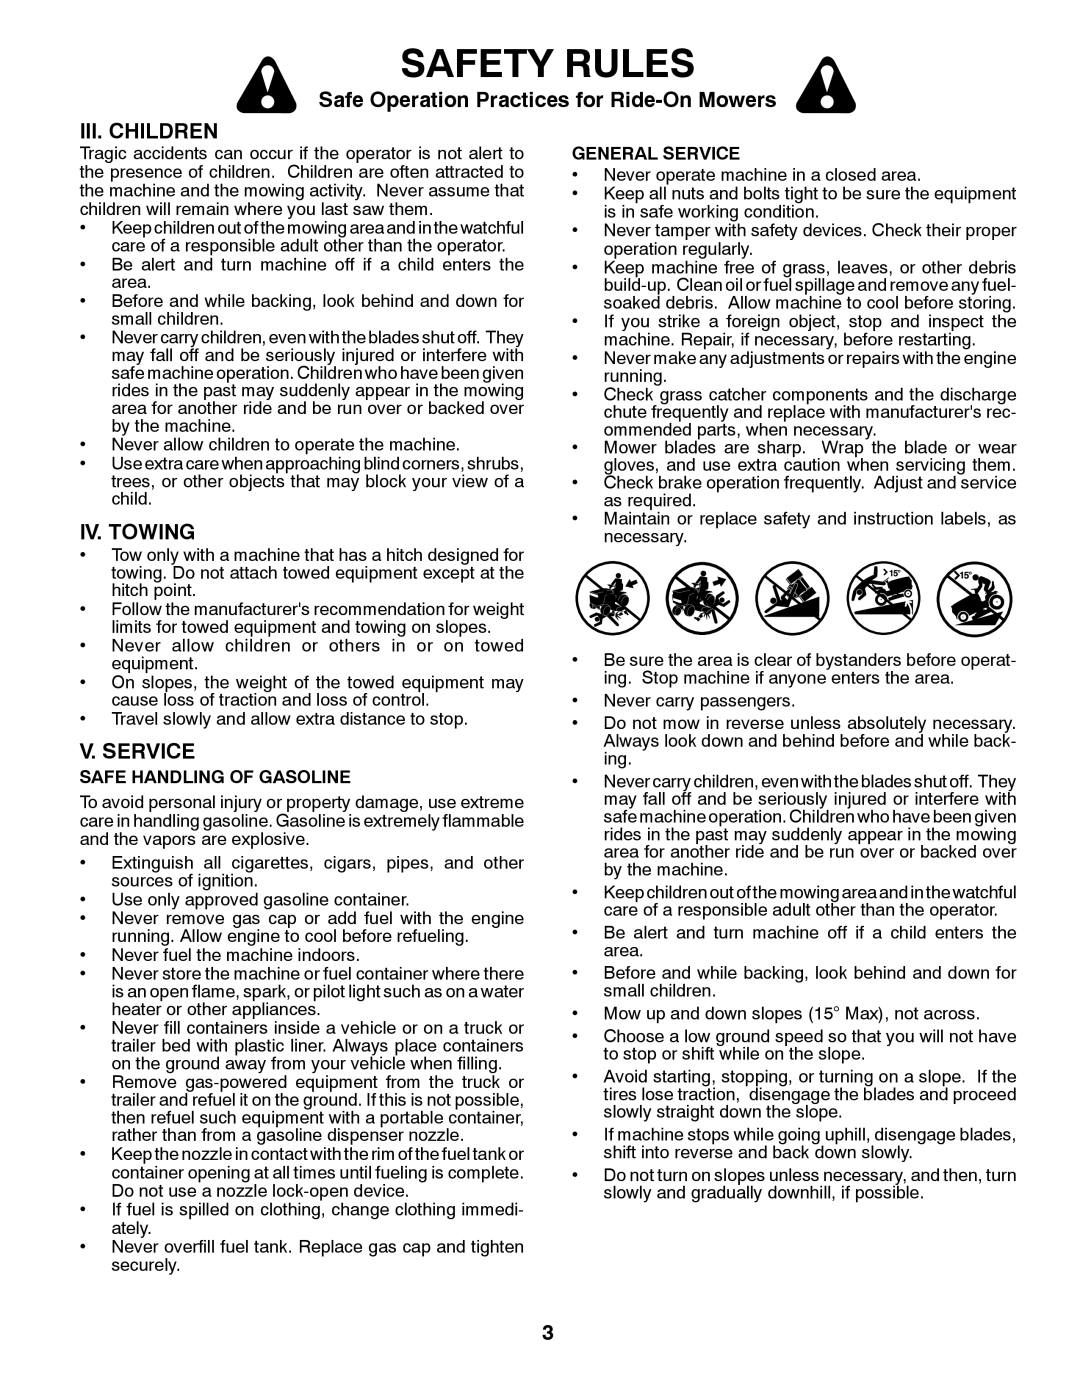 Husqvarna 532 44 05-66 Iii. Children, Iv. Towing, V. Service, Safety Rules, Safe Operation Practices for Ride-On Mowers 